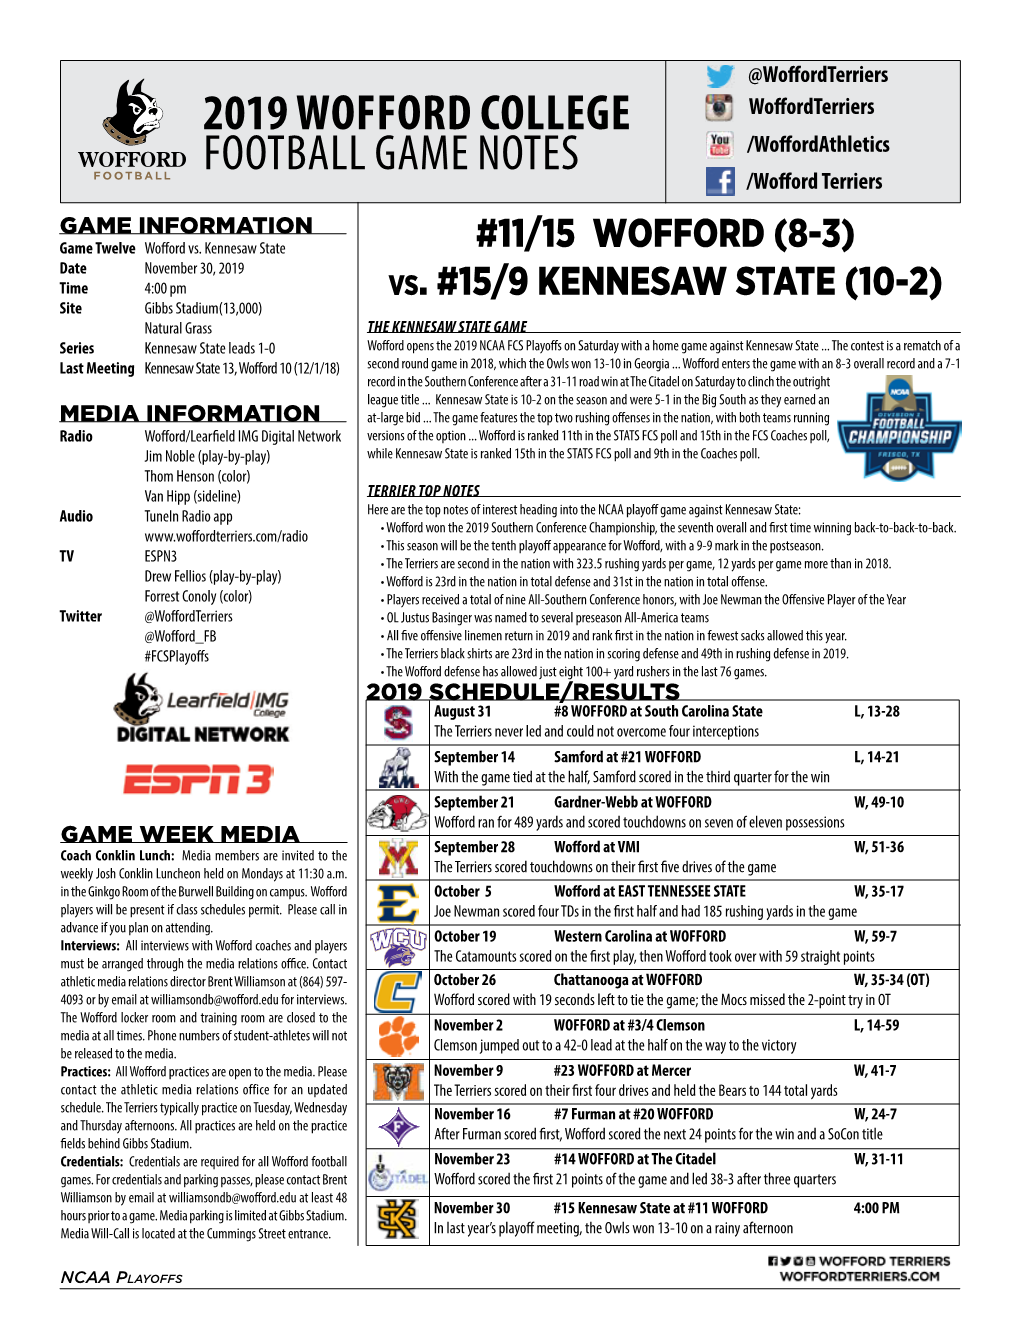 2019 Wofford College Football Game Notes